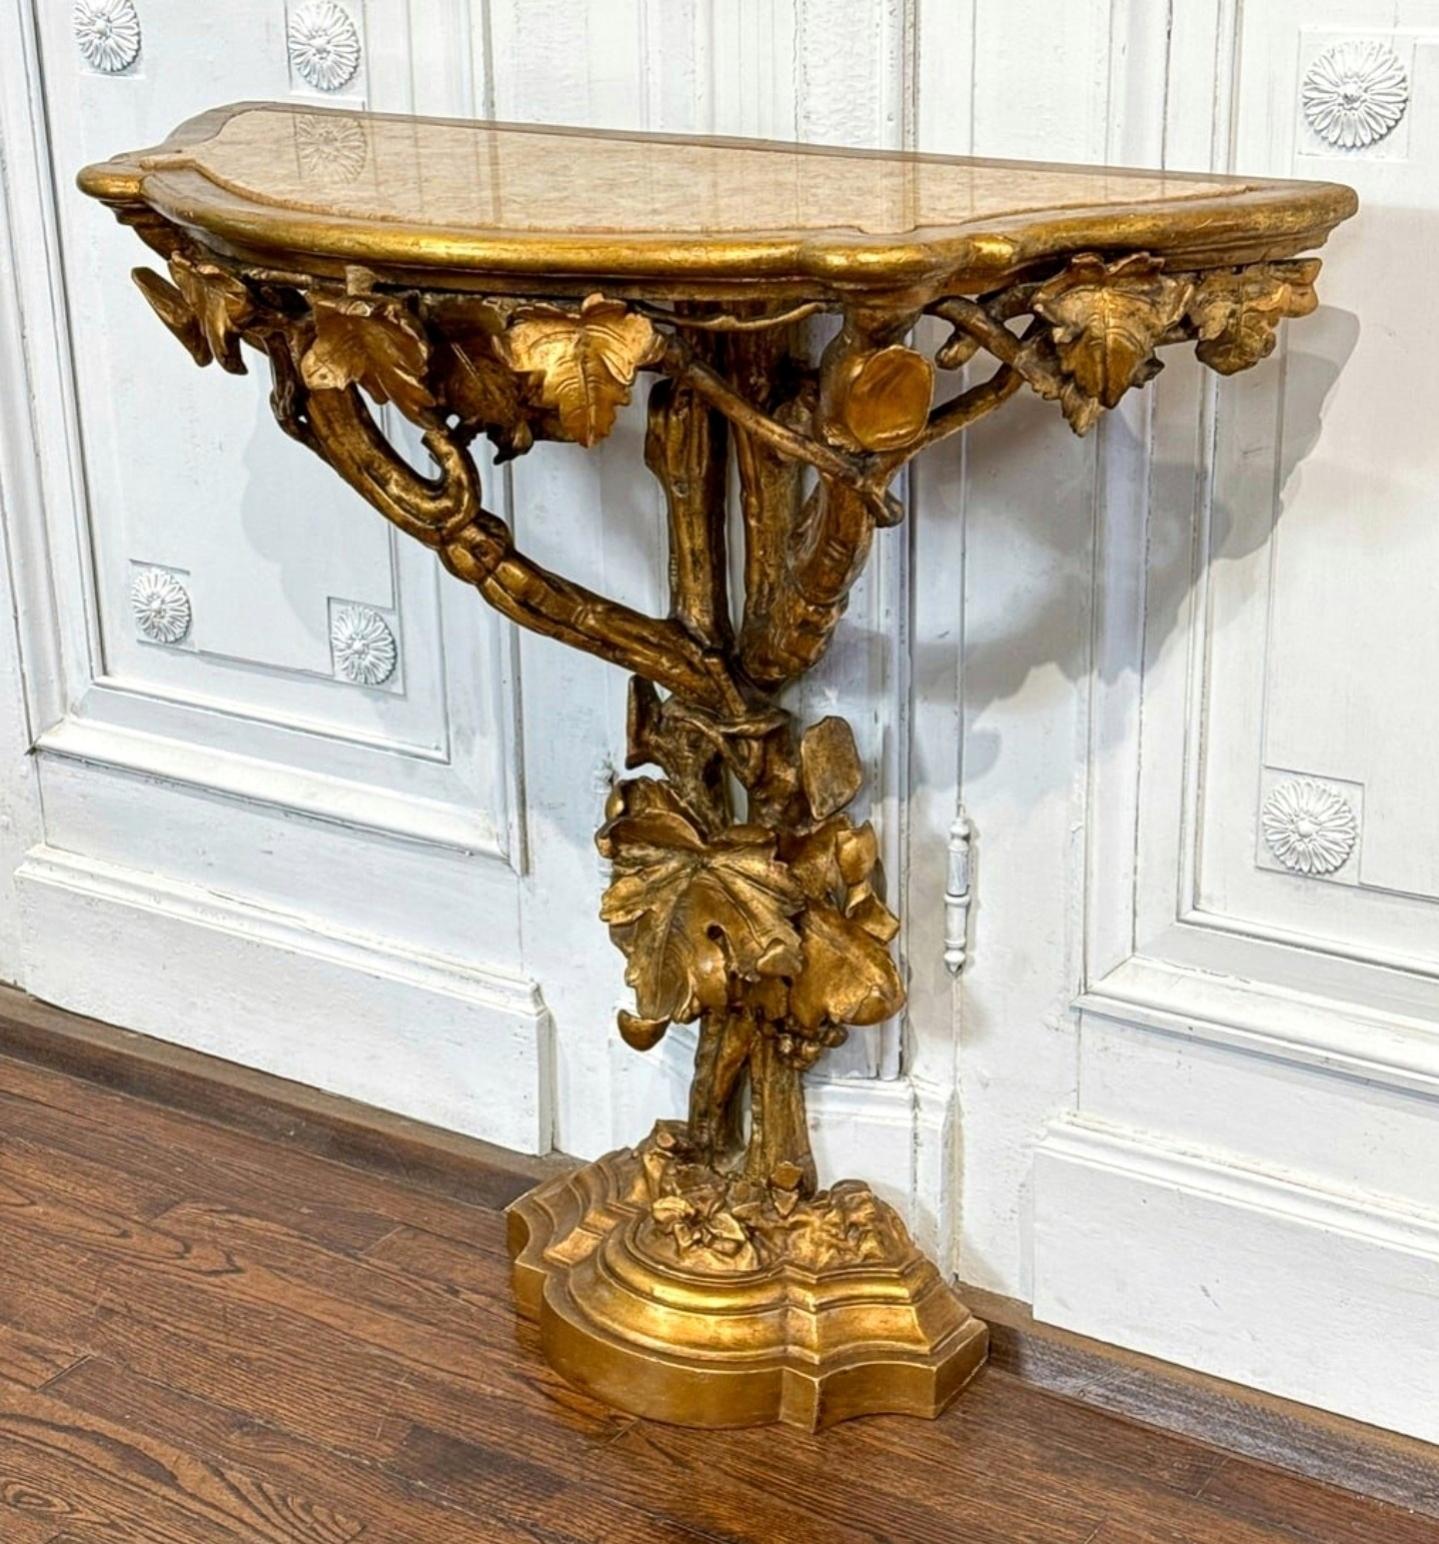 Antique Italian Rococo Revival Carved Giltwood Sculptural Console Table  In Good Condition For Sale In Forney, TX